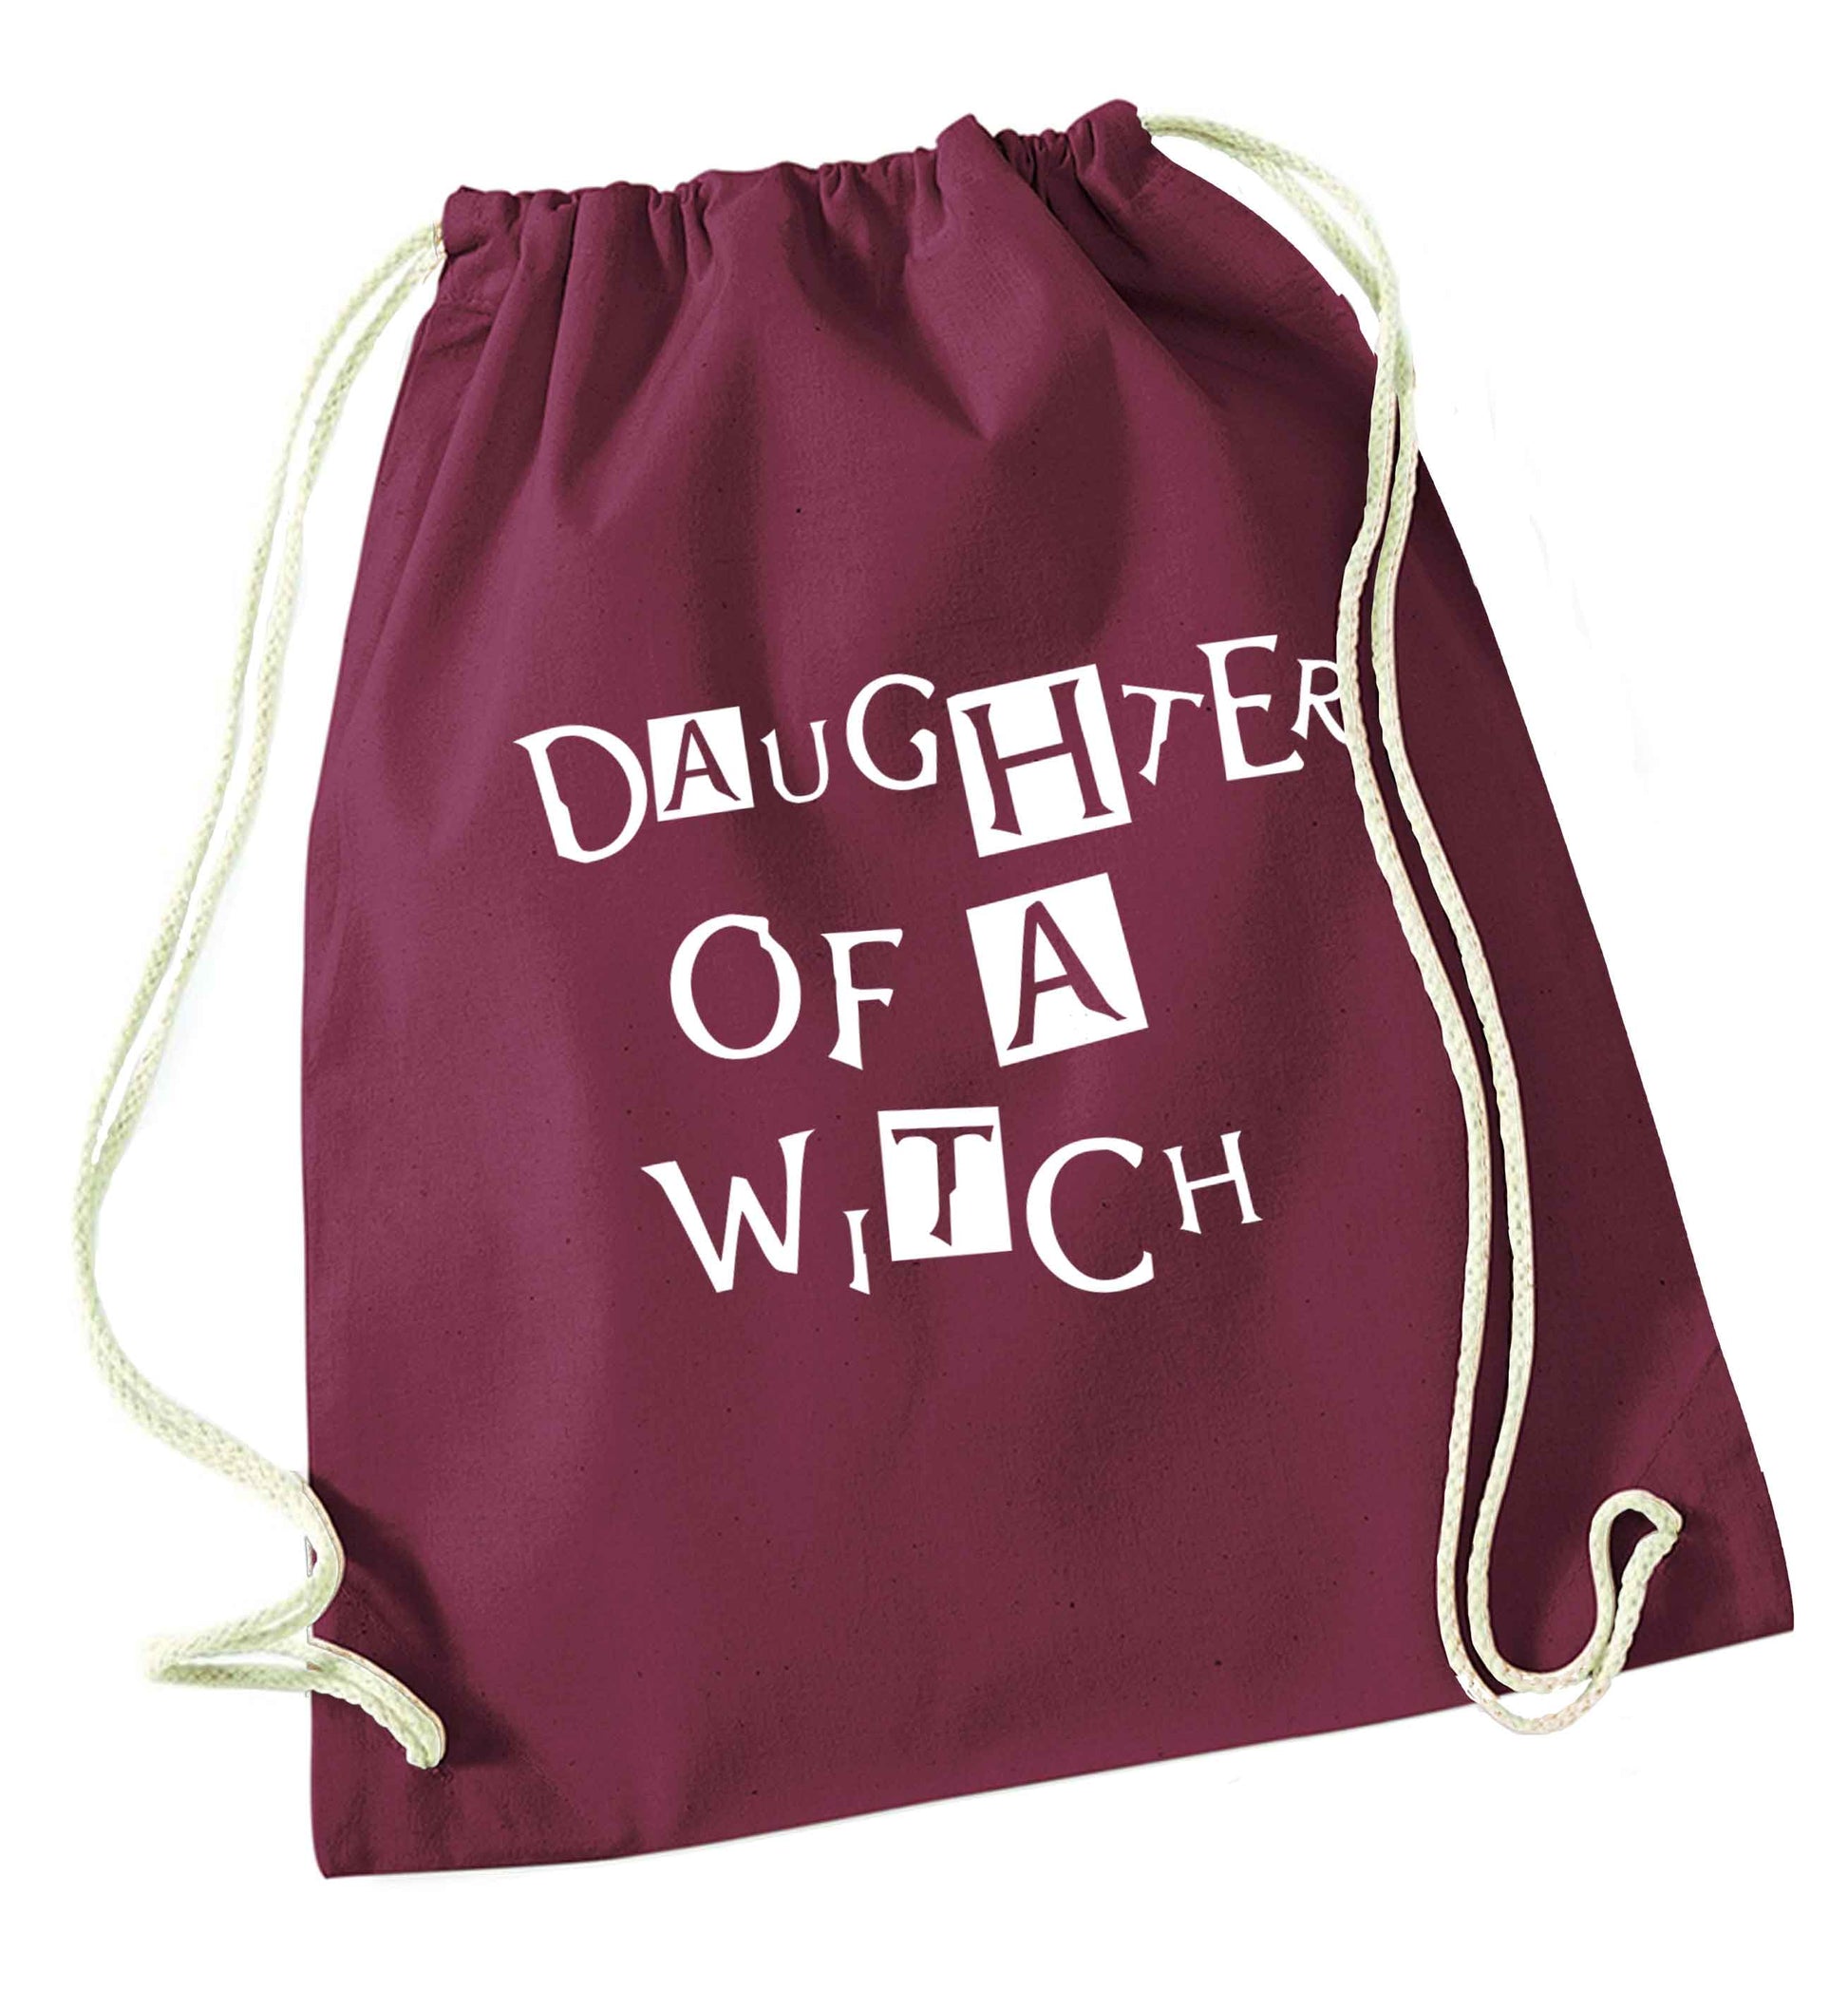 Daughter of a witch maroon drawstring bag